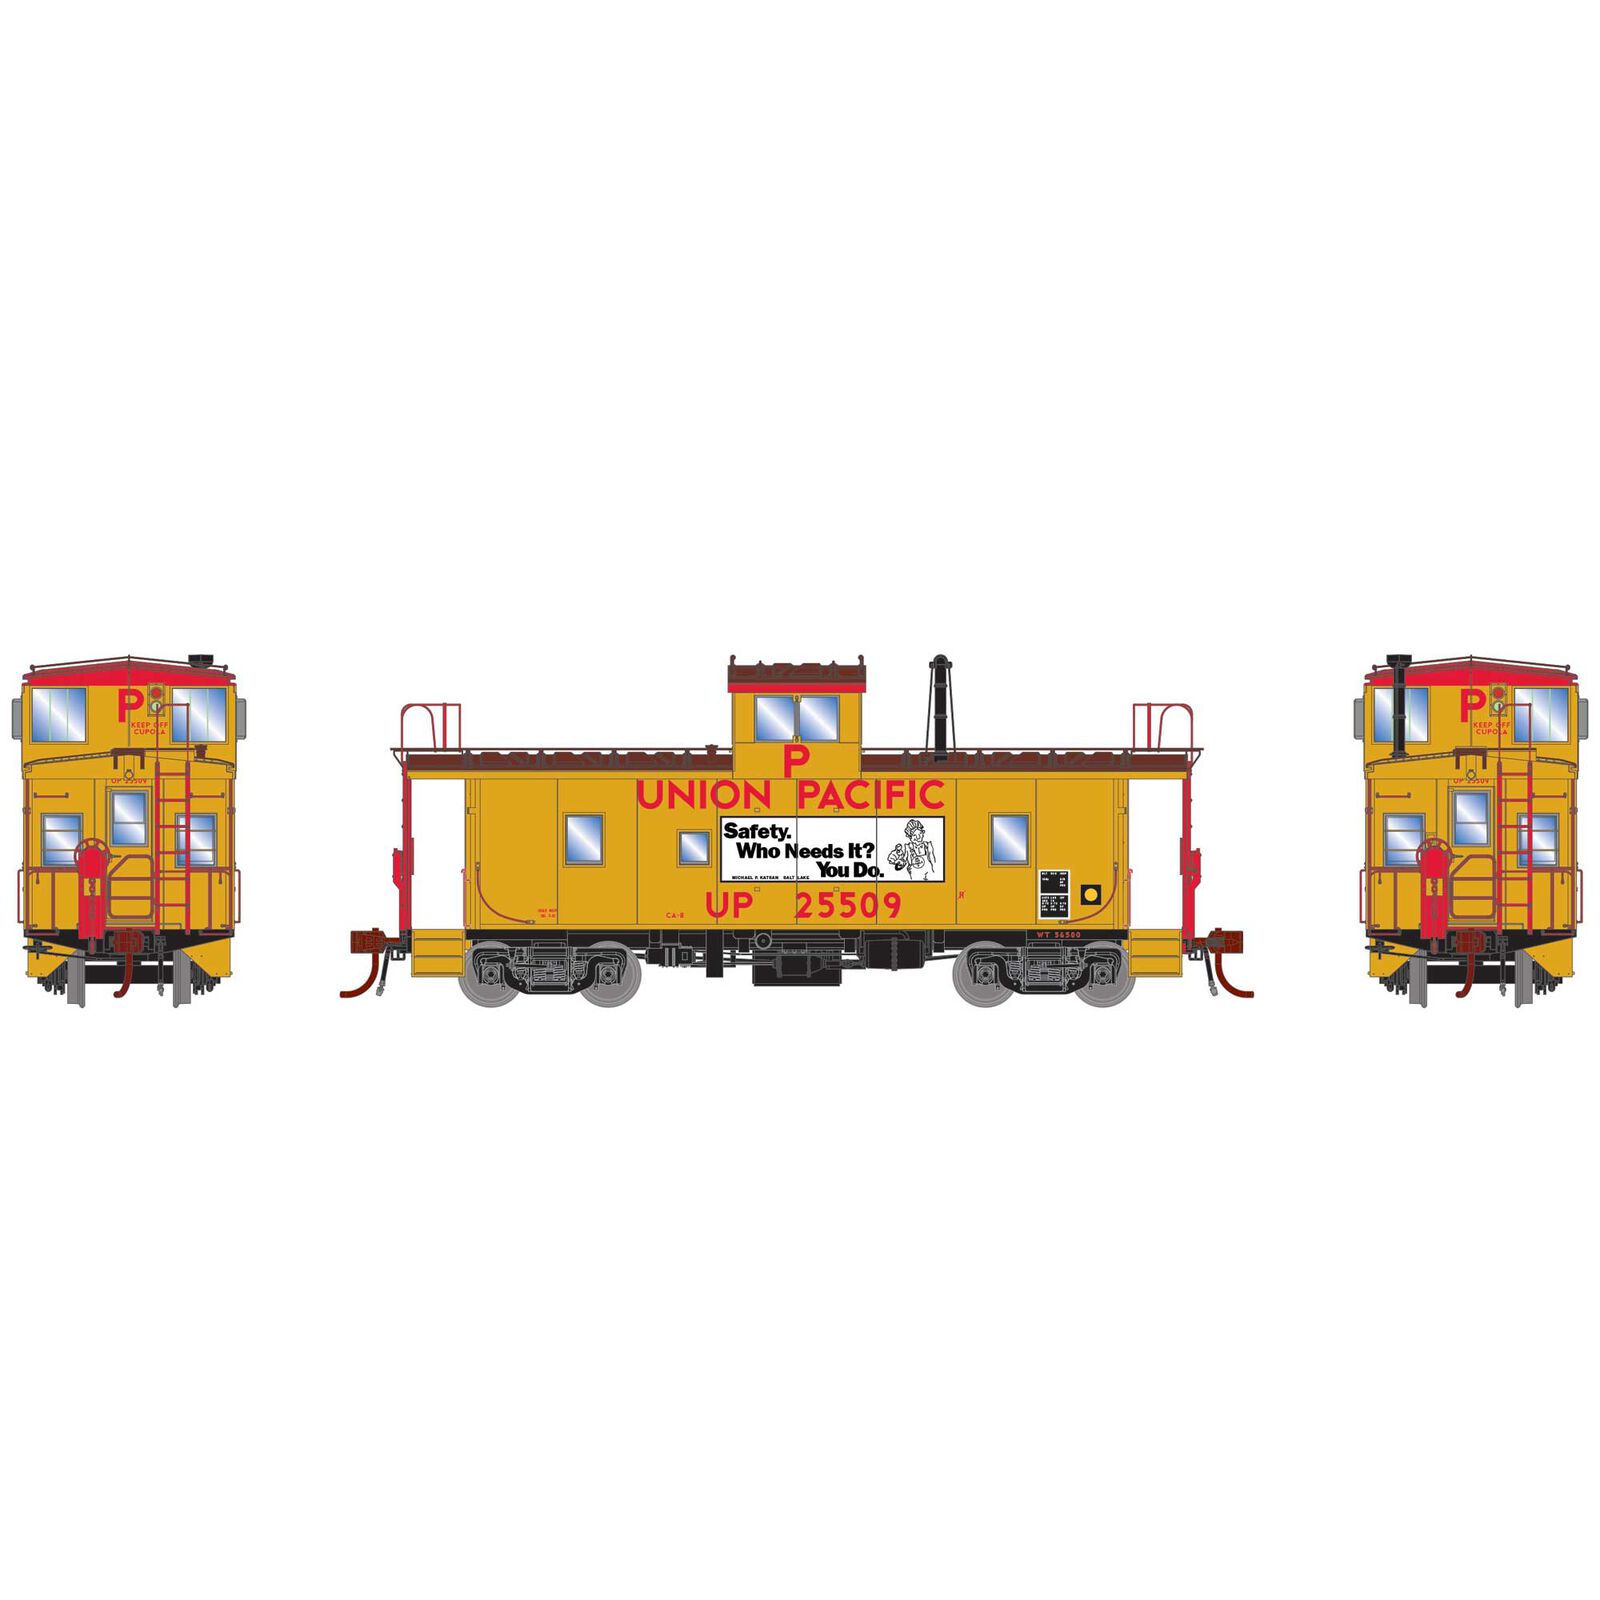 HO CA-8 Late Caboose with Lights UP #25509